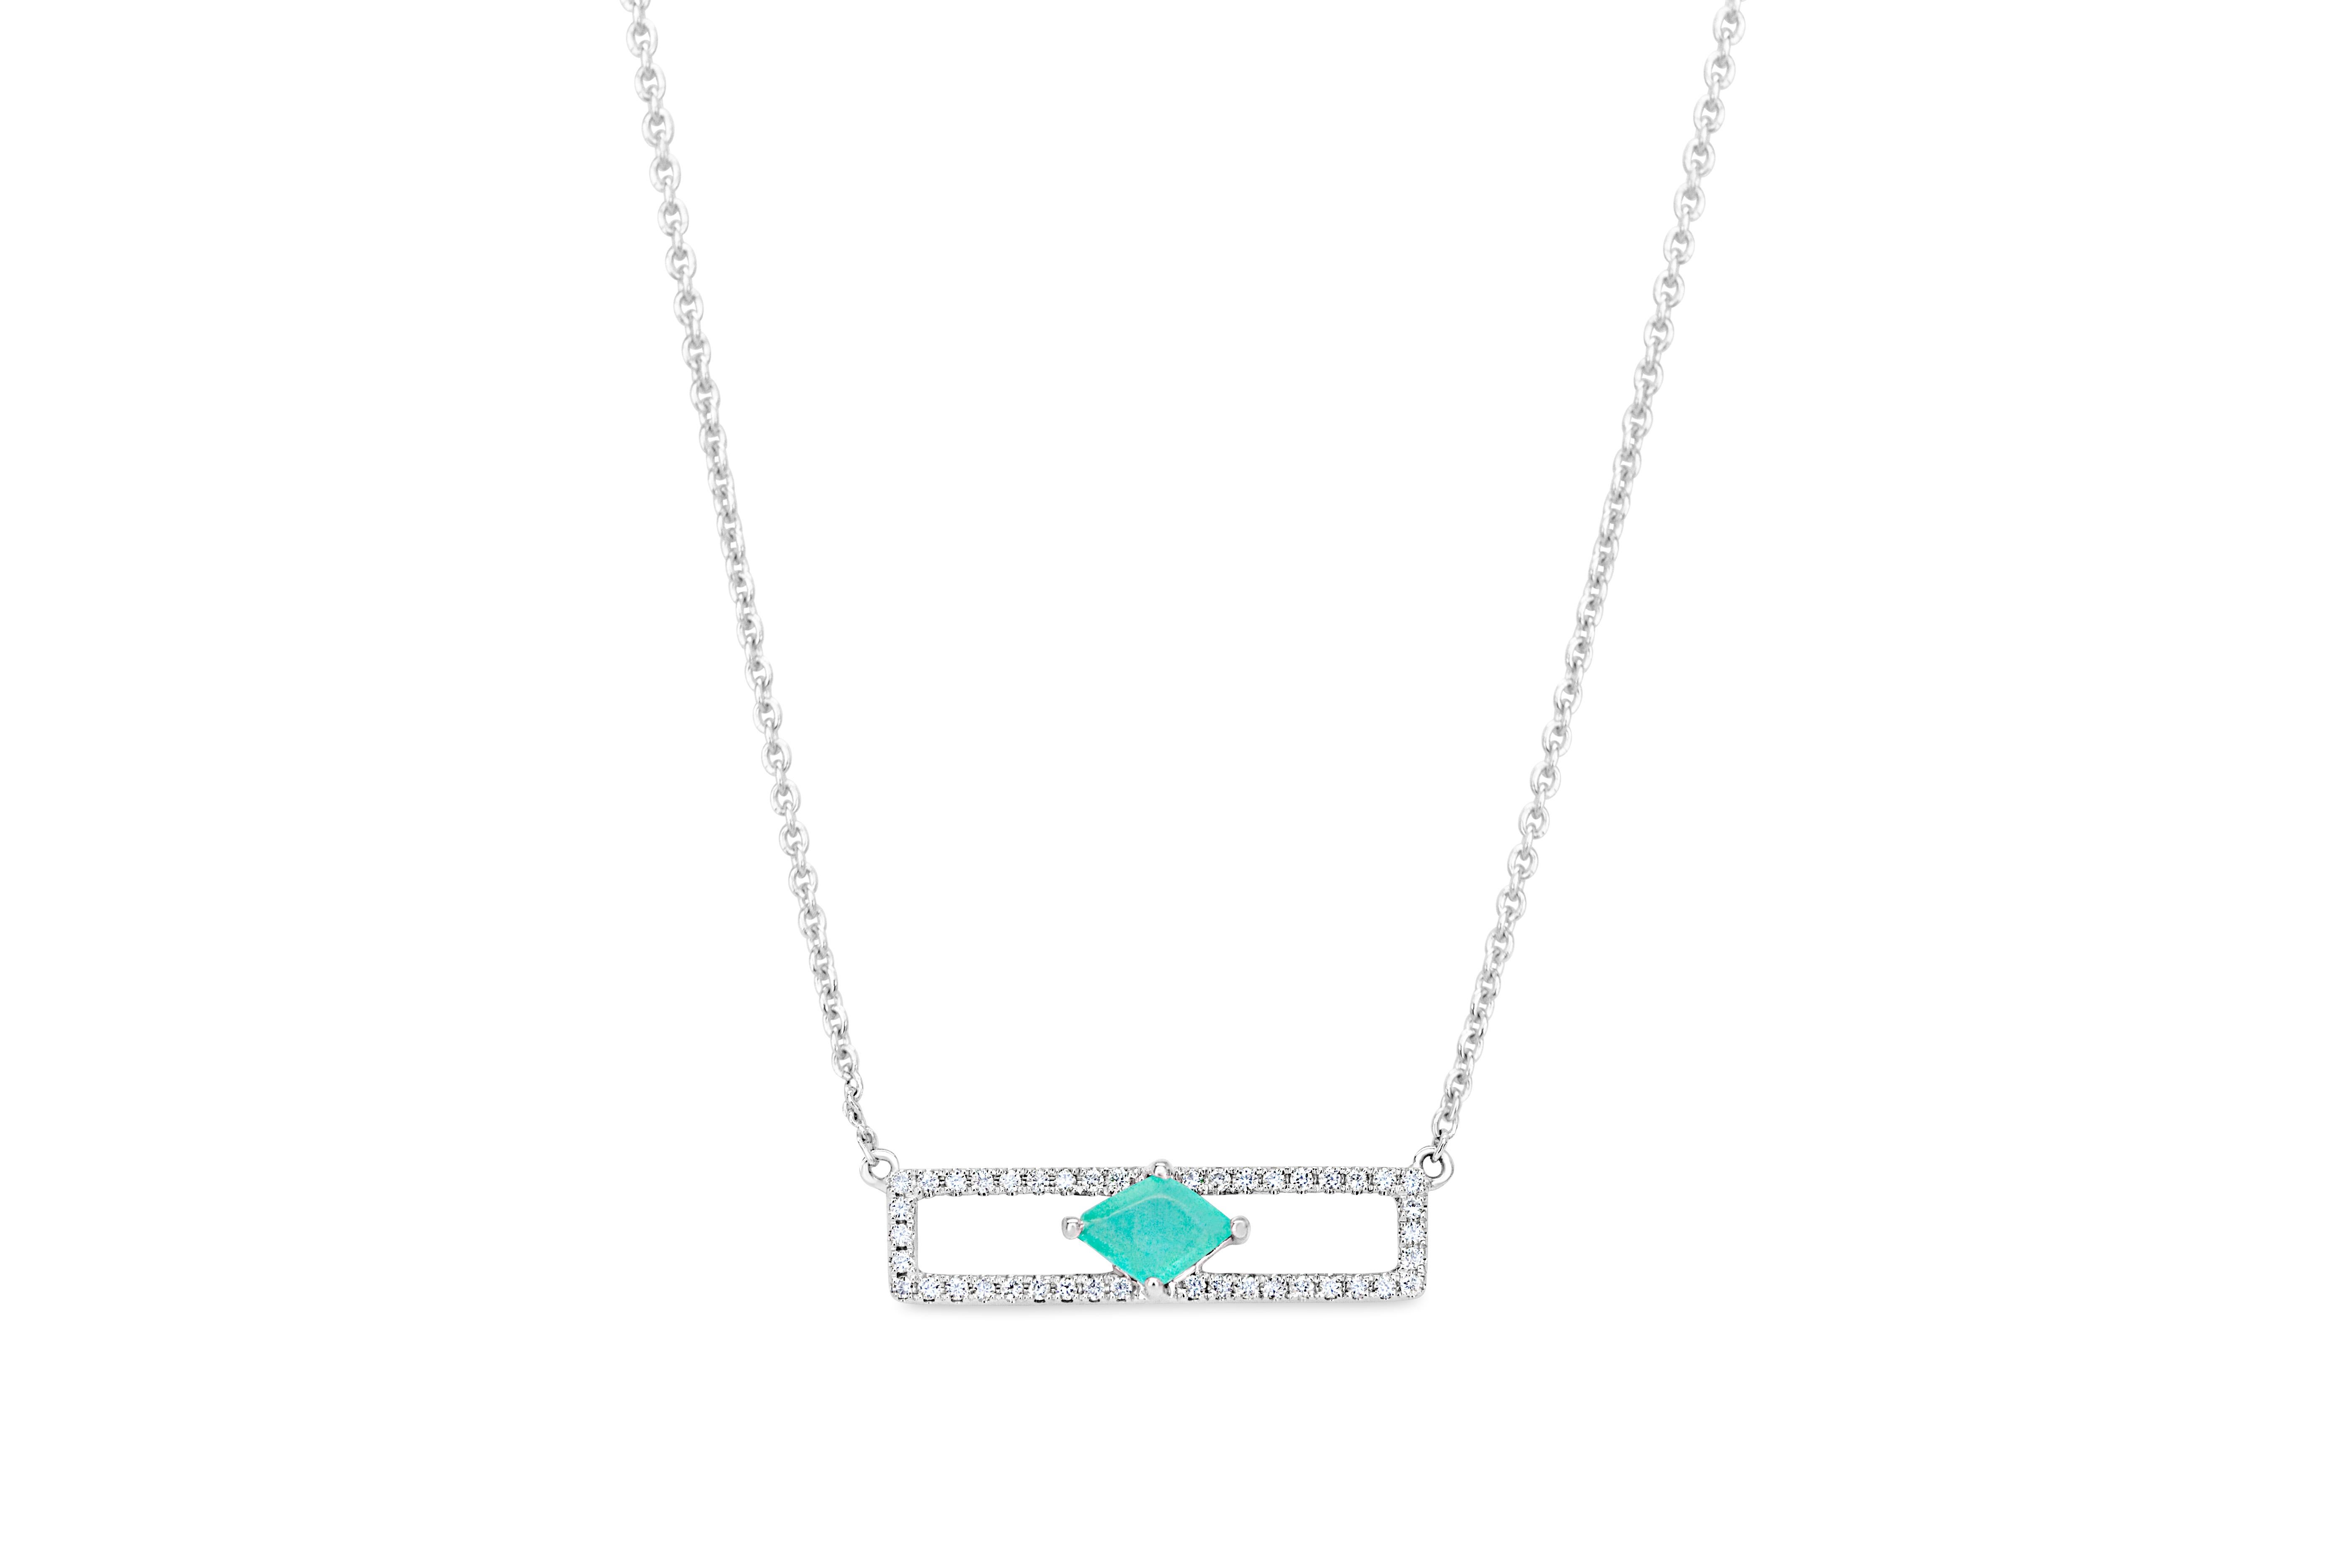 emerald-necklace-investments